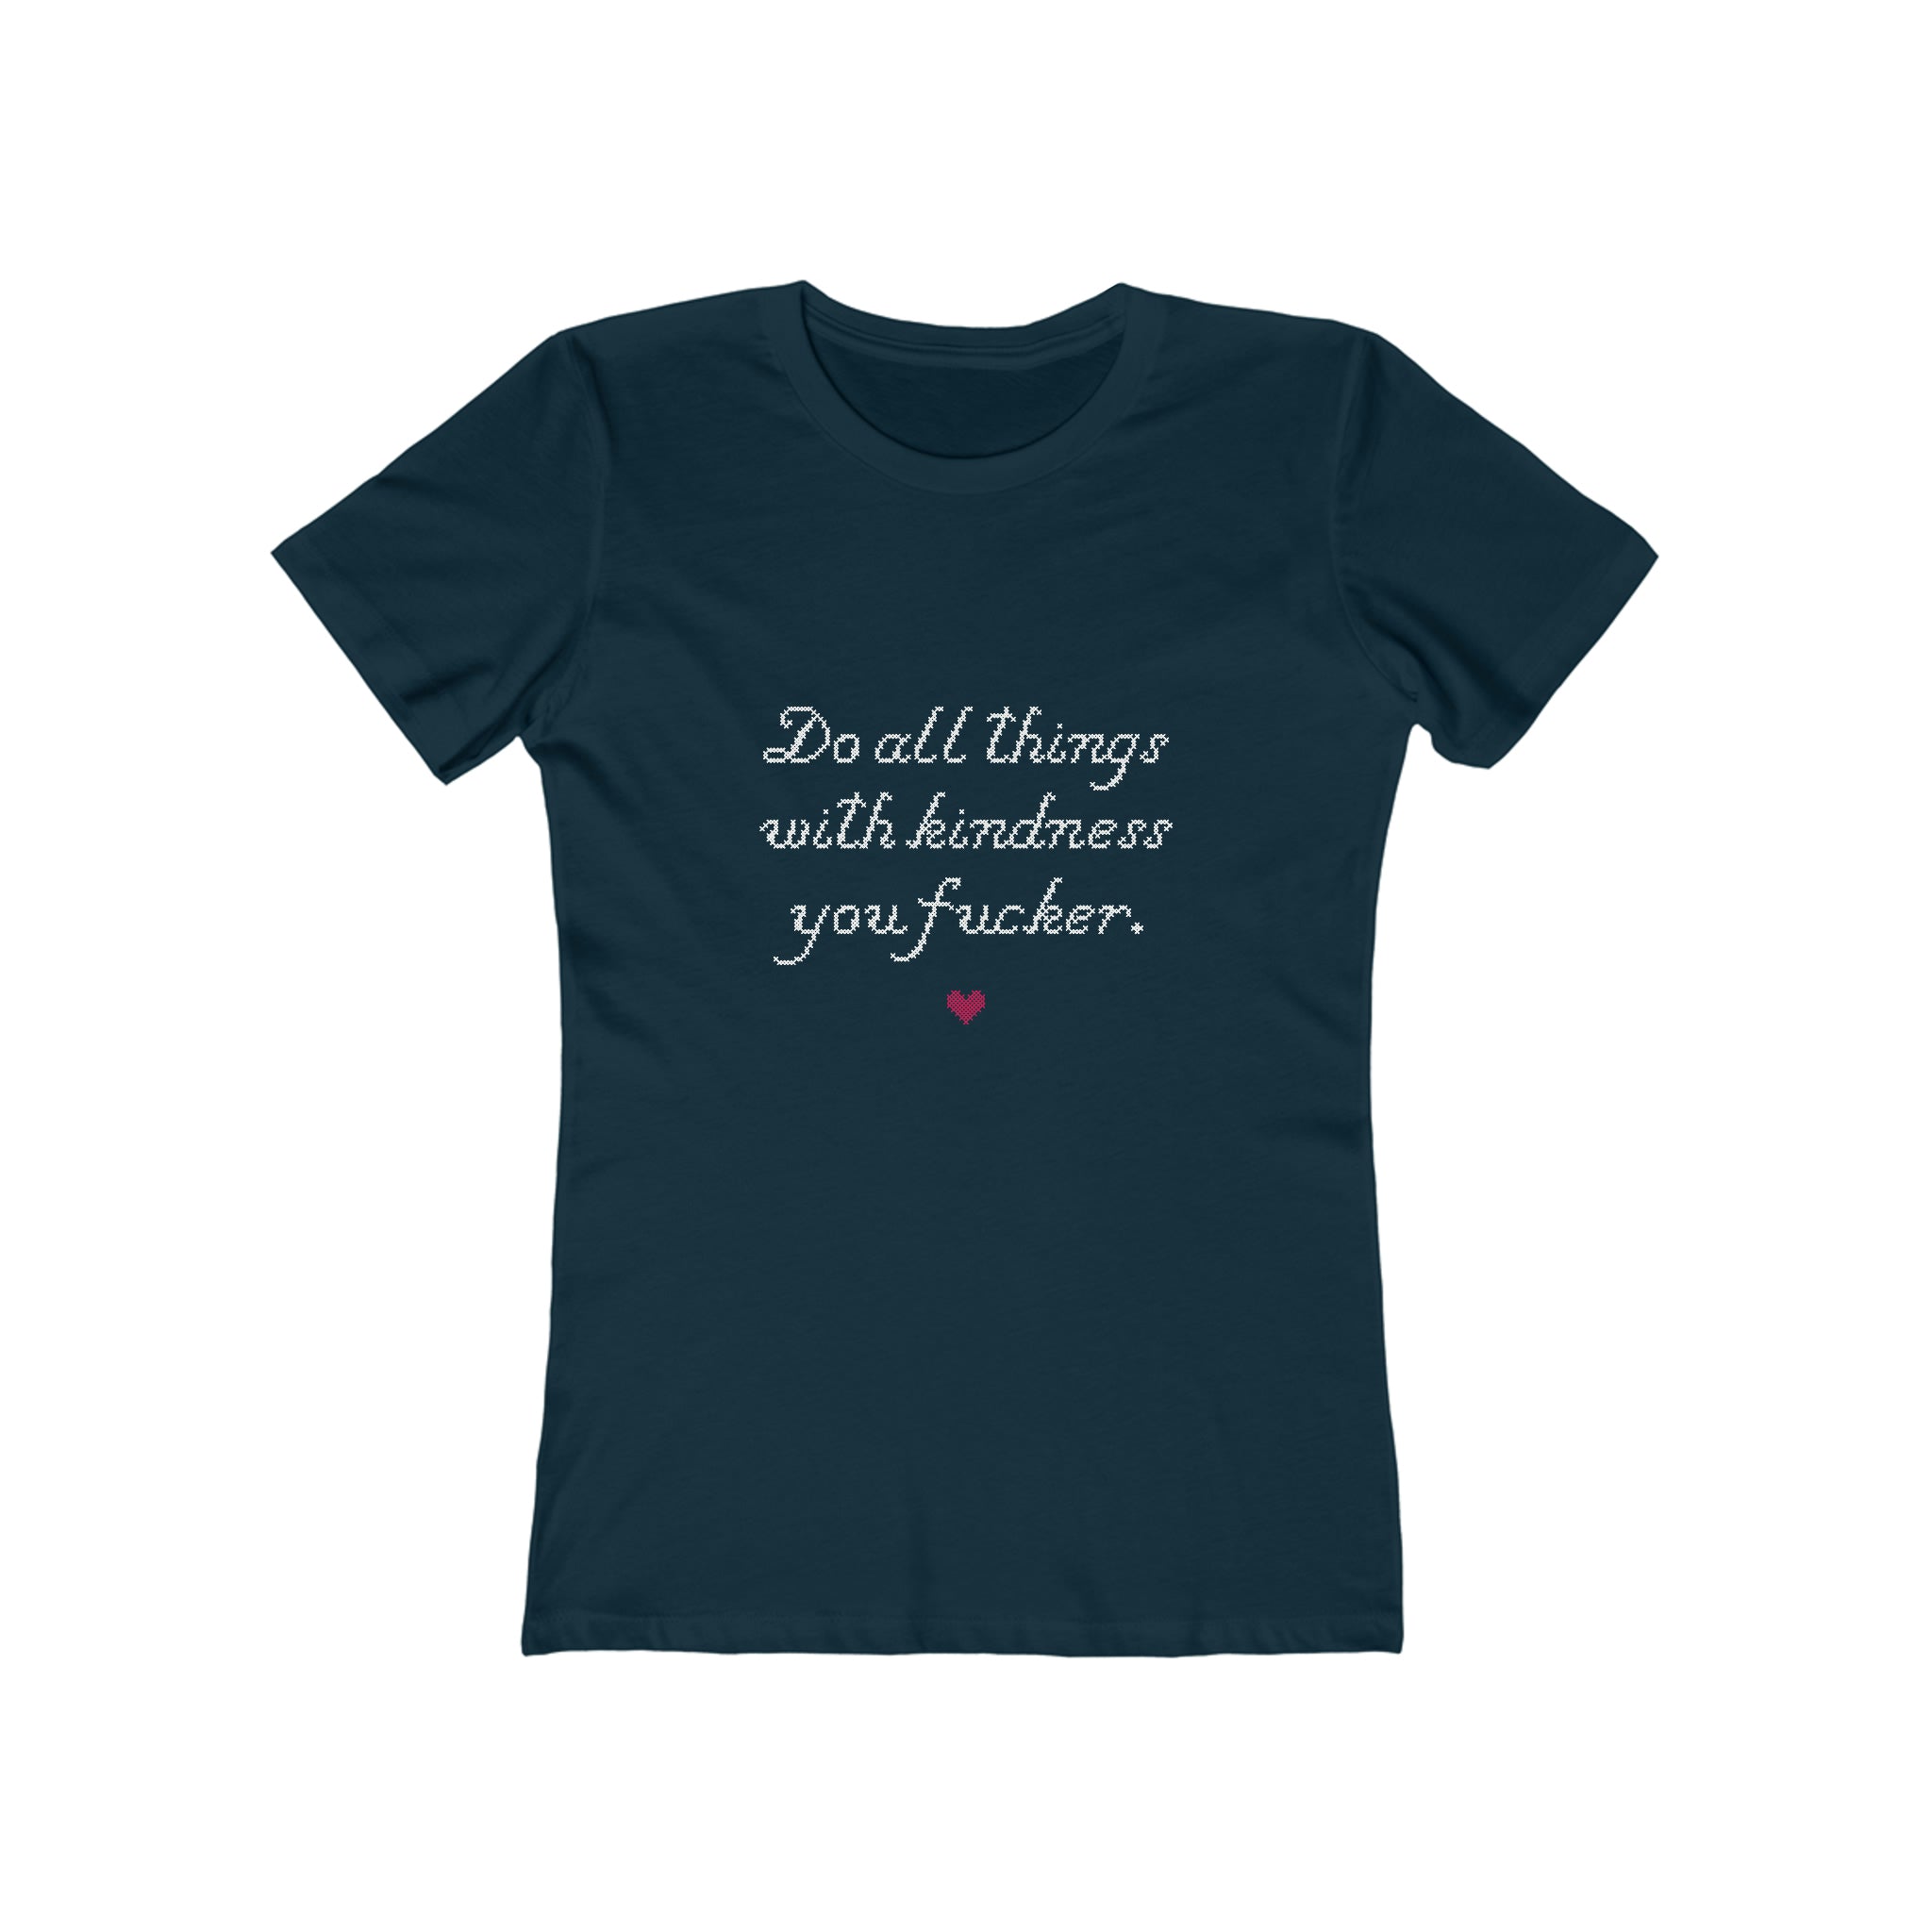 Do all things with Kindness fucker : Women's 100% Cotton T-Shirt